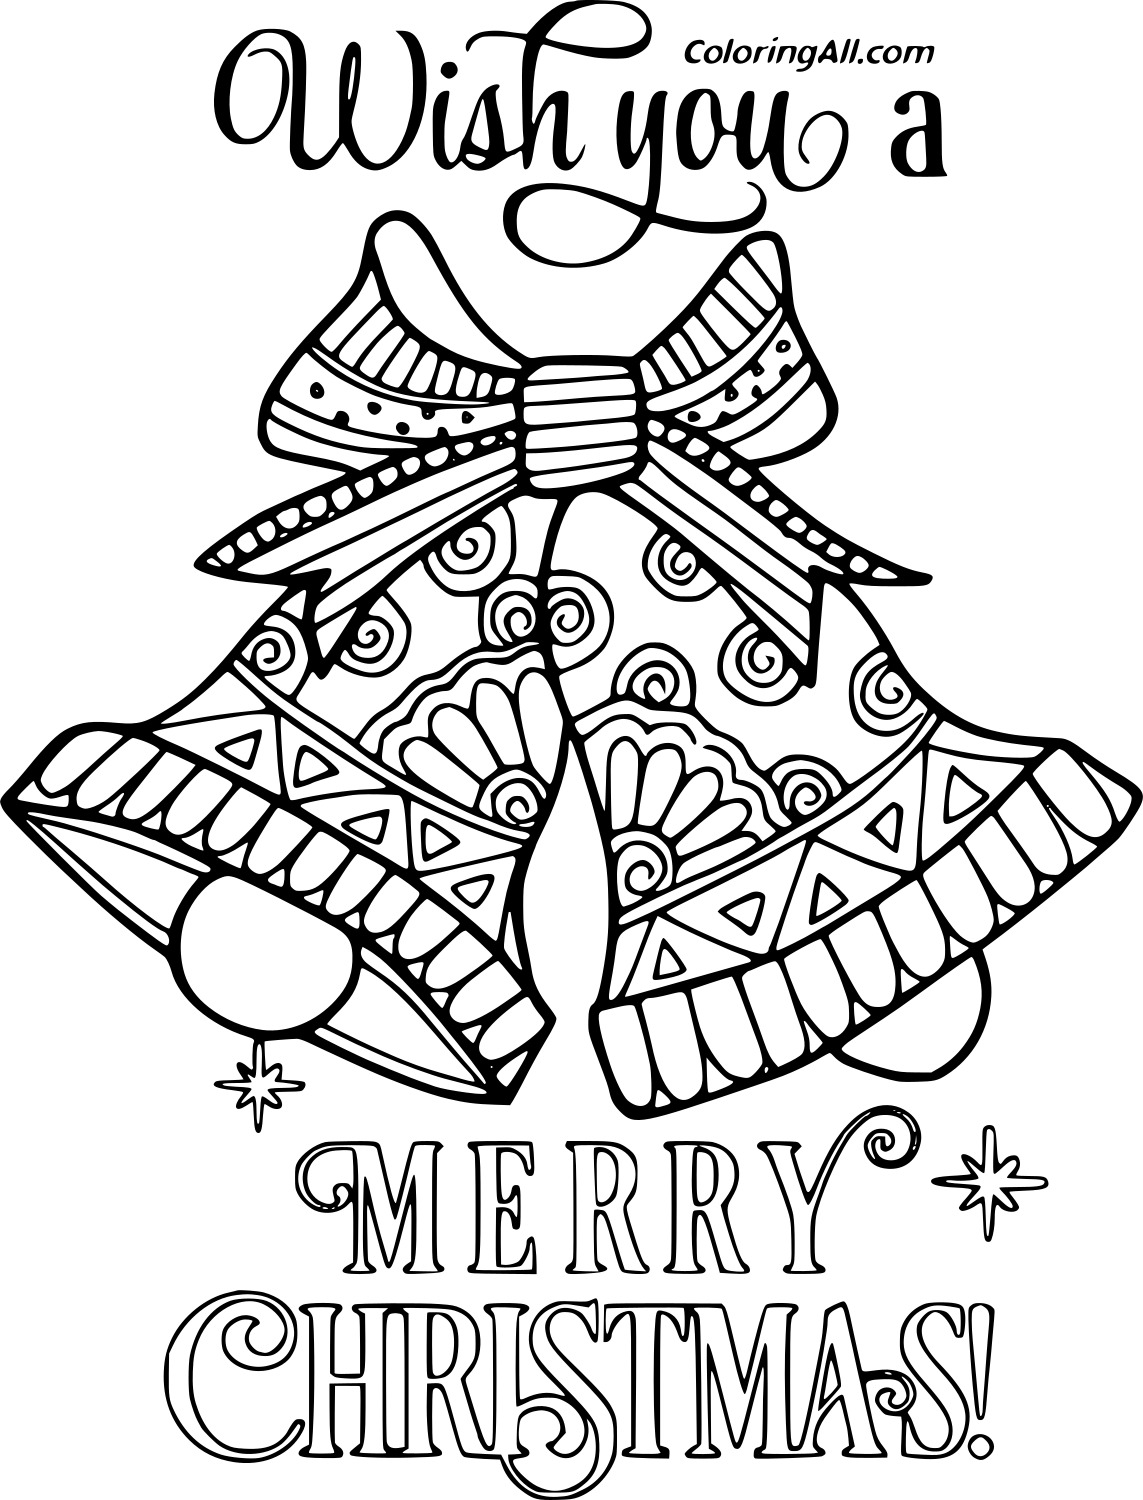 Wish You A Merry Christmas Bells Image For Kids Coloring Page